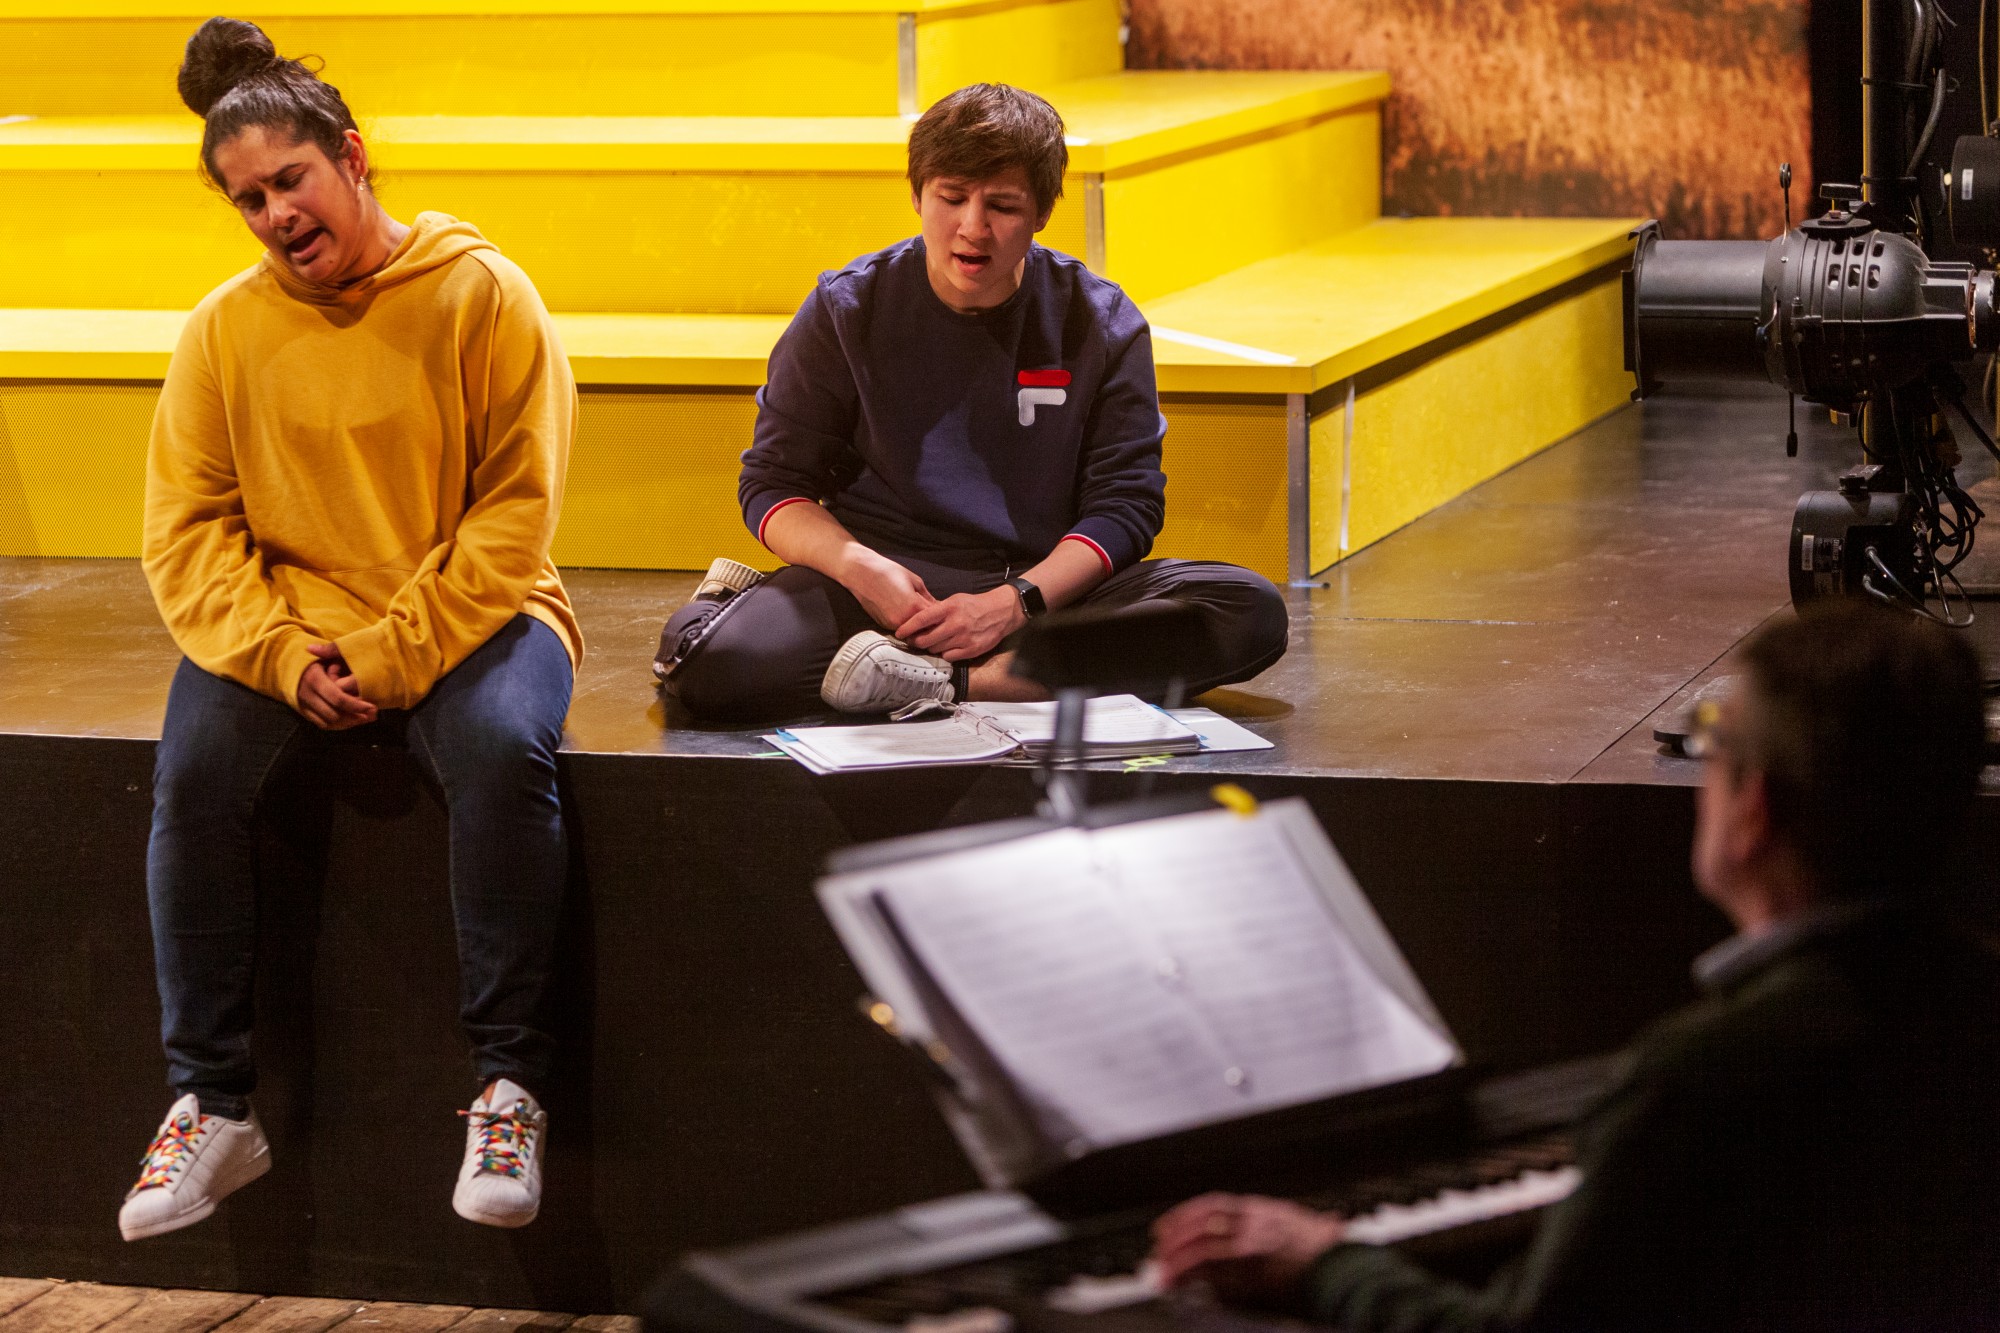 Actors, from left, Sushma Saha and Kai Alexander practice a musical number at during a rehearsal for Interstate at MixedBlood Theatre on Tuesday, Feb. 18. The production, created by Kit Yan and Melissa Li, follows the experiences of two trans people, navigating a myriad of cultural issues.